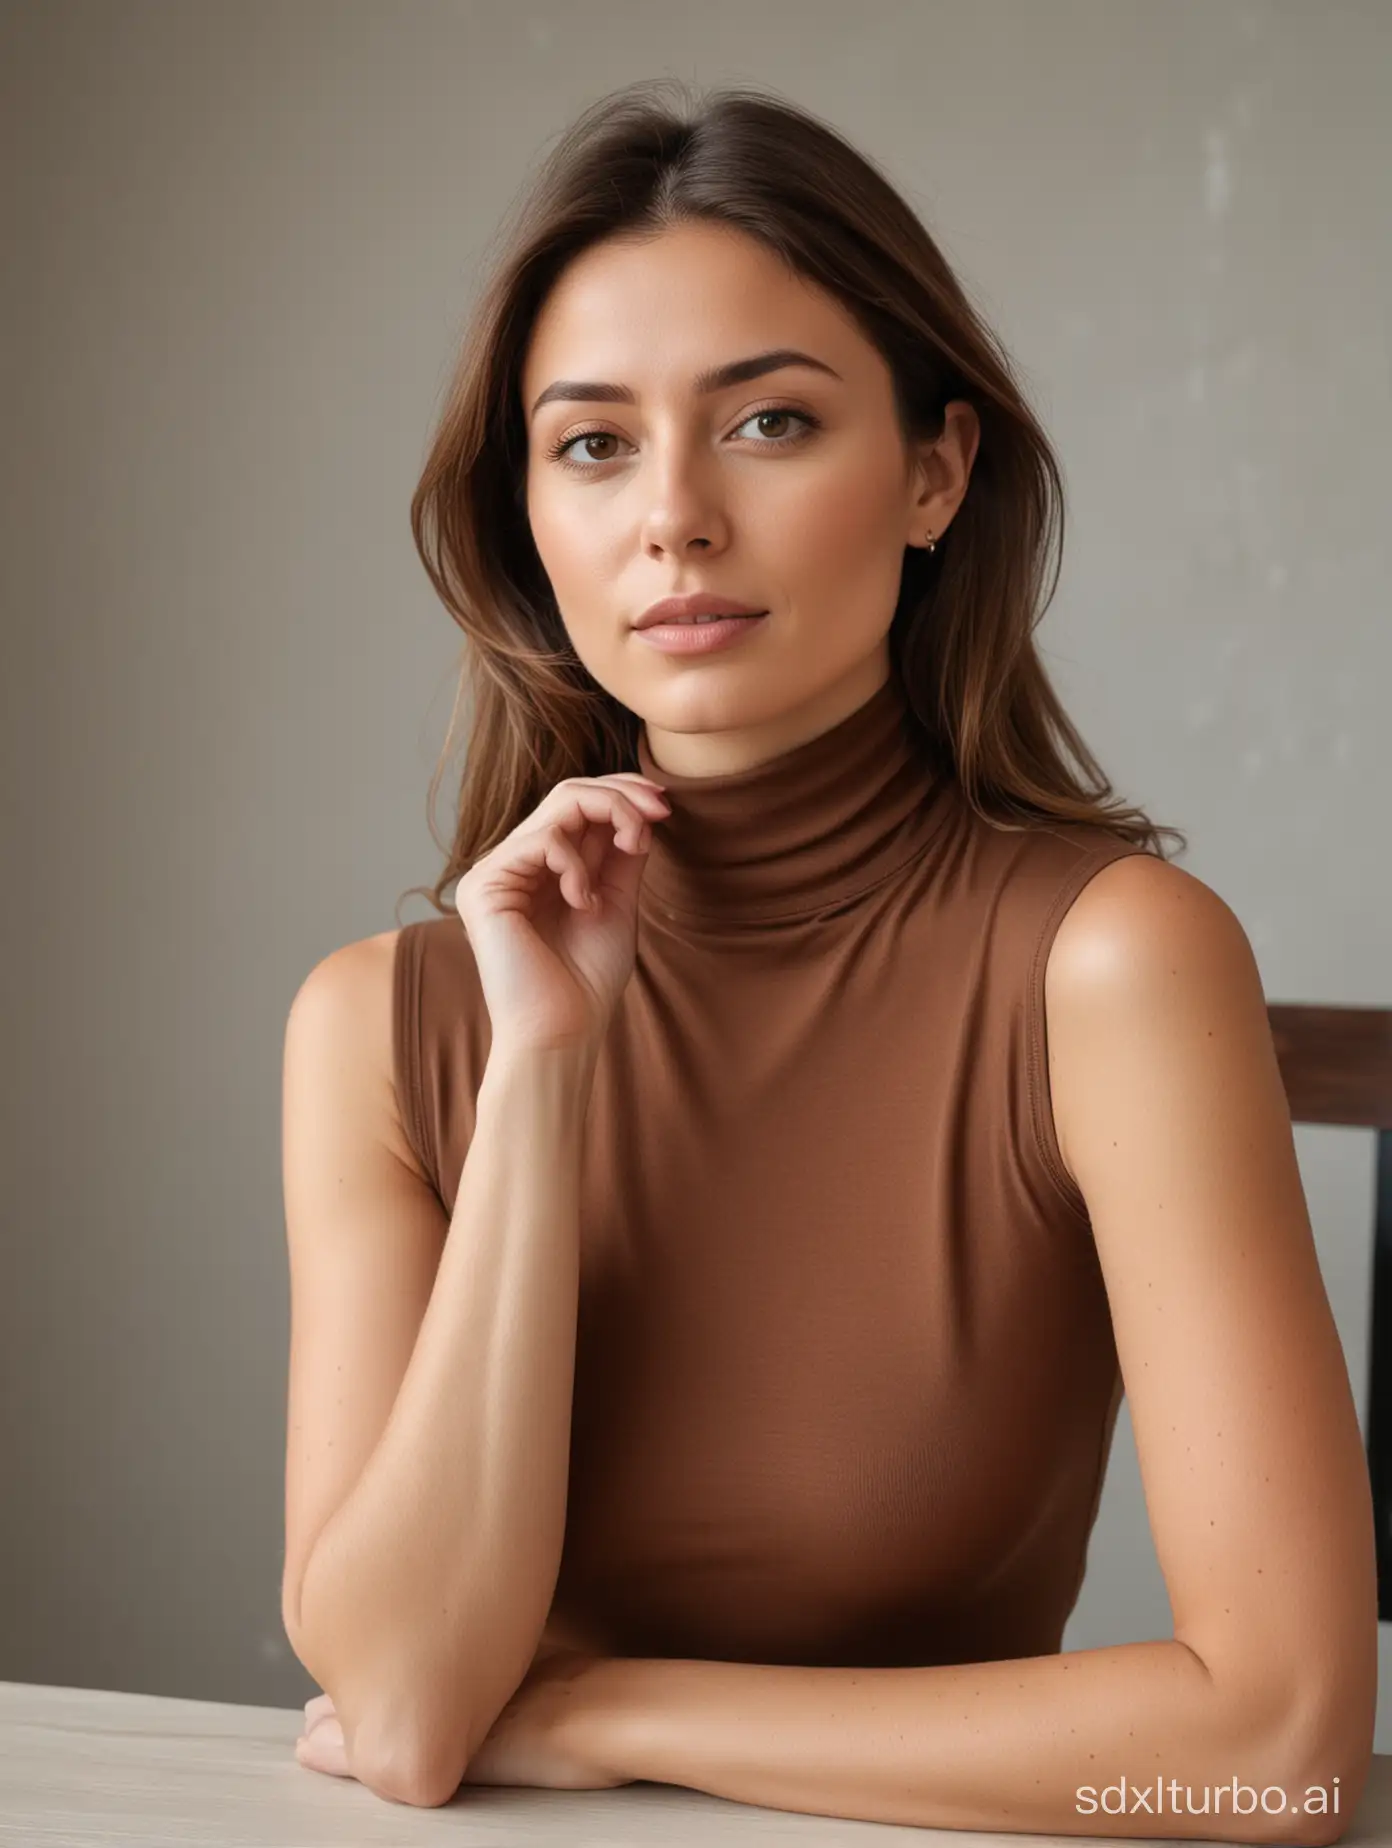 Thoughtful-Woman-in-Brown-Turtleneck-Sleeveless-Top-at-Table